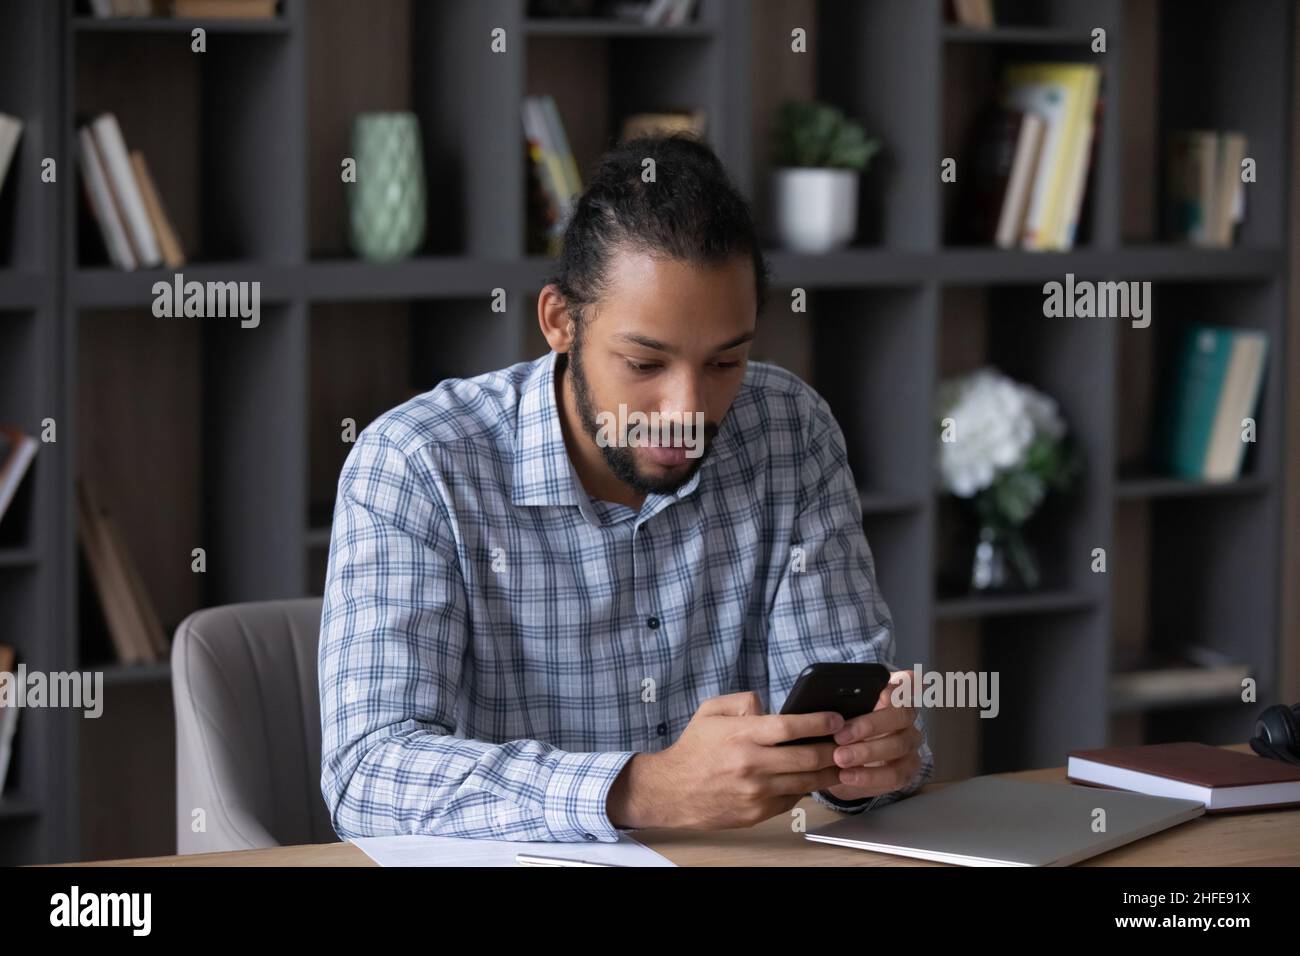 Focused busy millennial Black business man browsing internet on smartphone Stock Photo